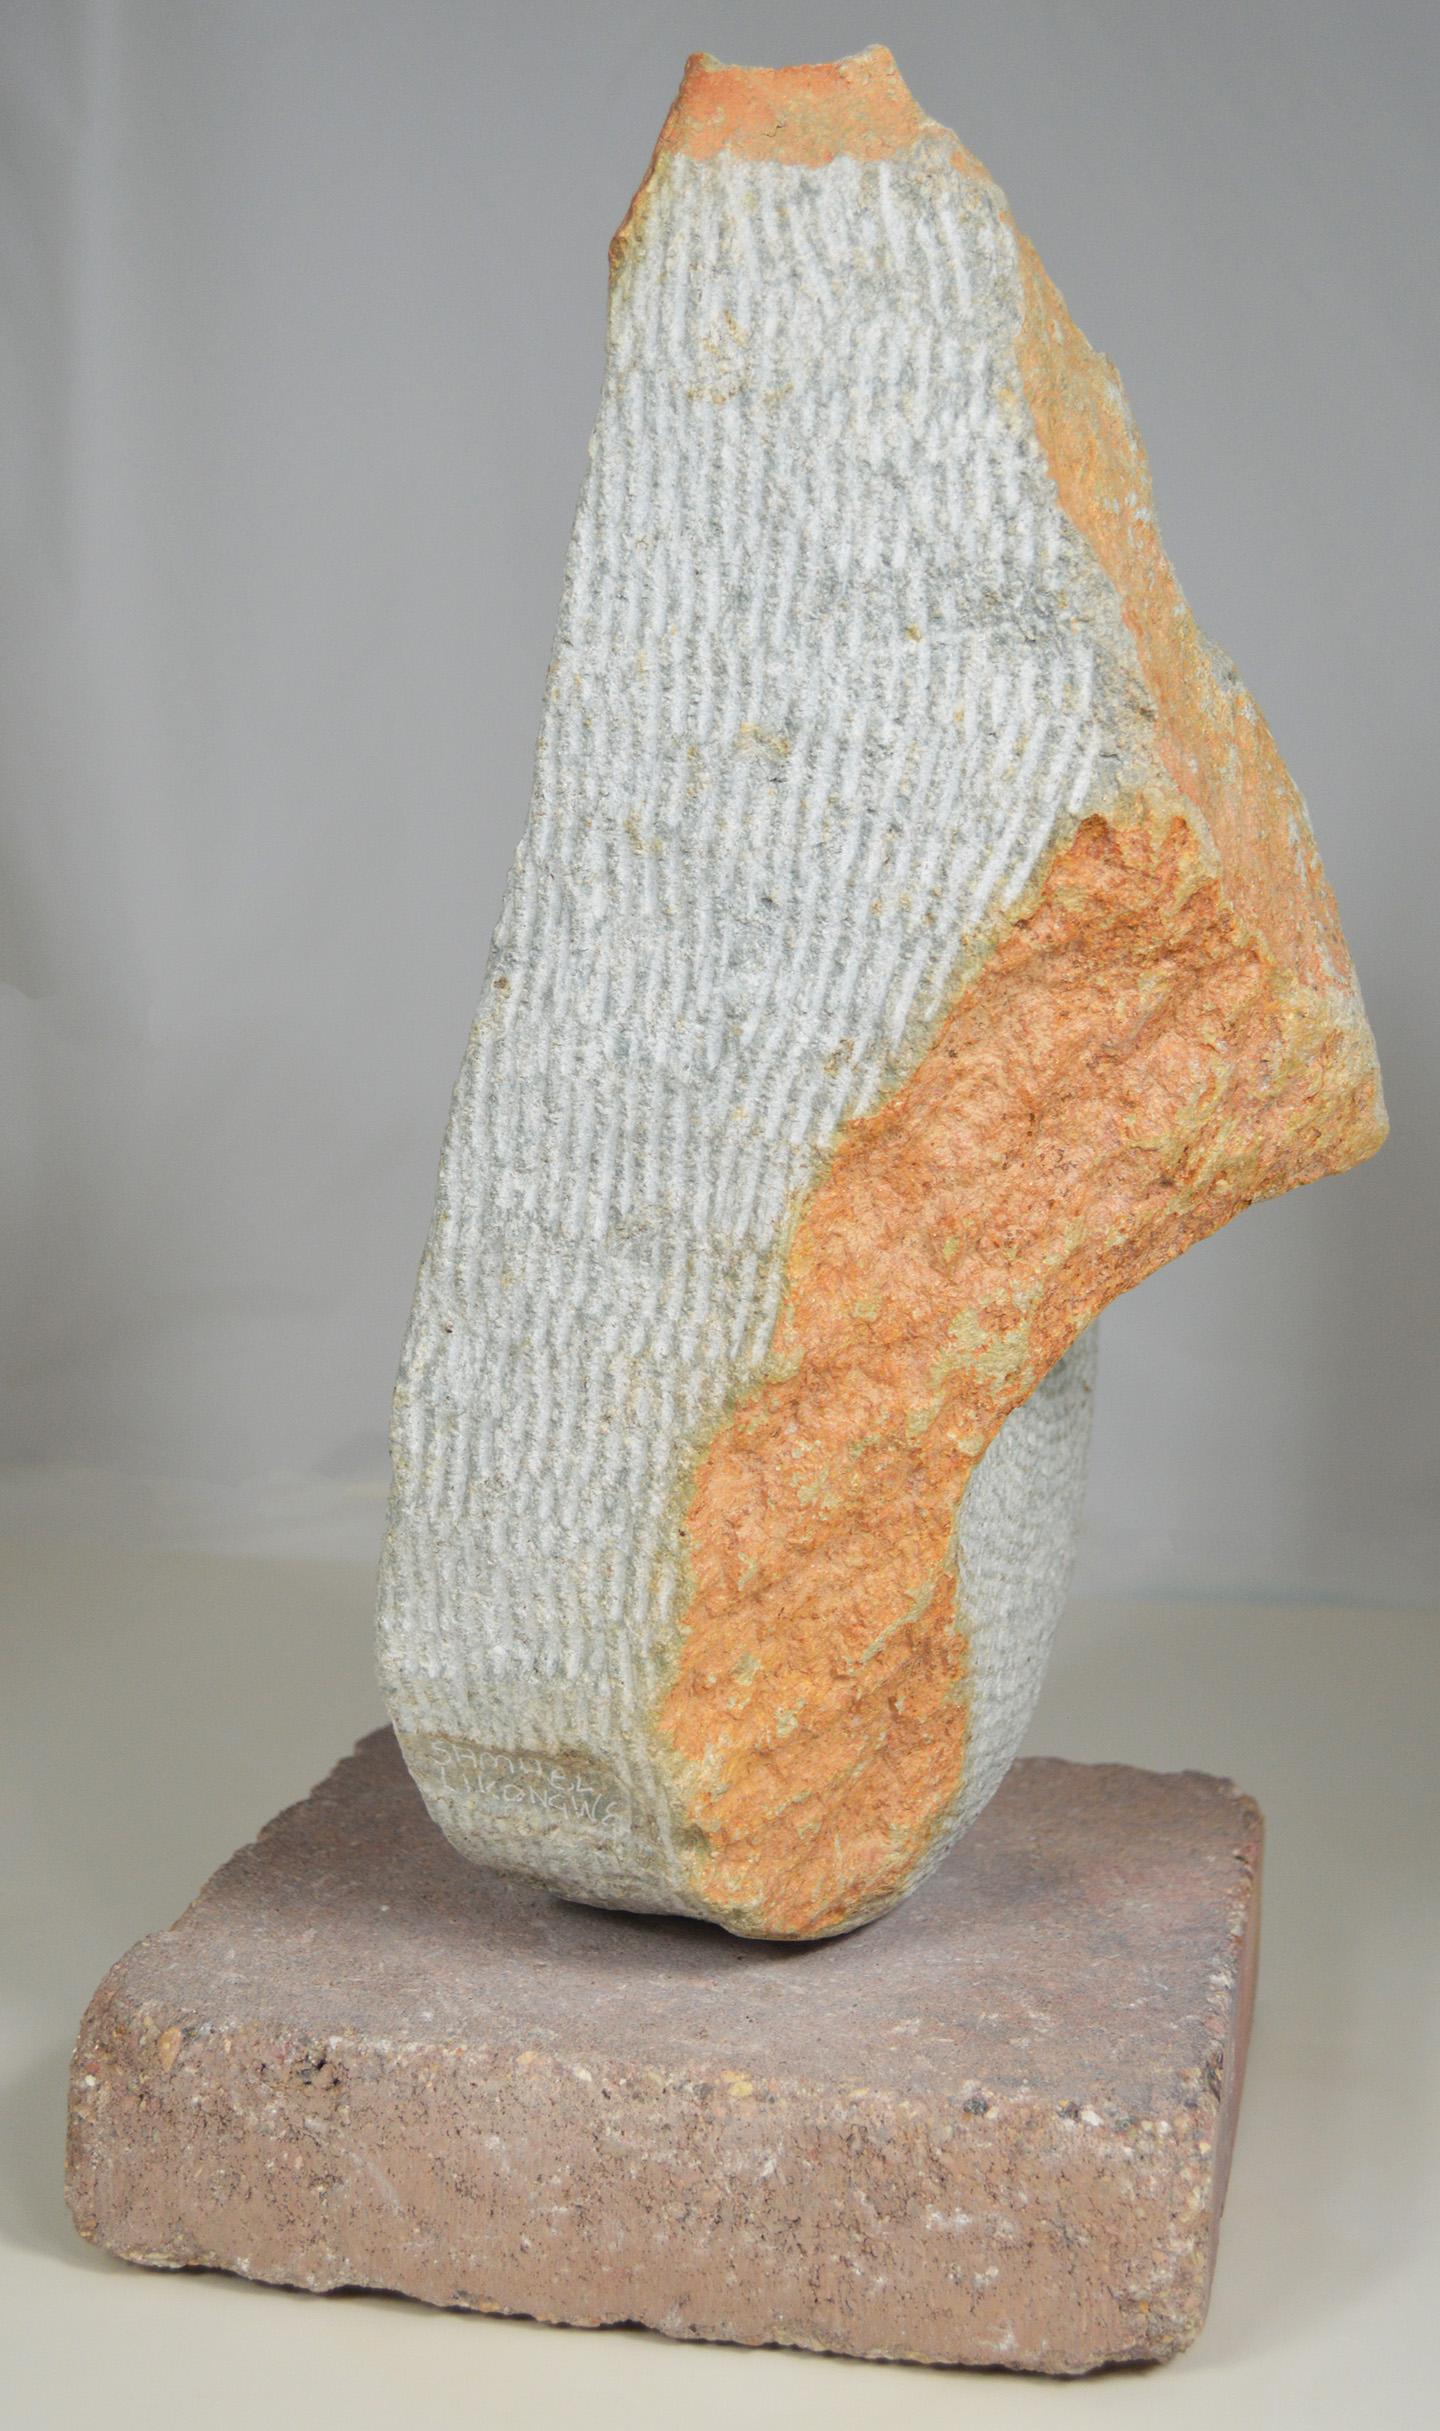 'Chicken' is an original opal serpentine sculpture signed by the Zimbbwean artist Samuel Likongwe. Based in Harare, Likongwe was trained in the Shona stone sculpting tradition and his style consistently shows a careful ordering of the nonuniformity